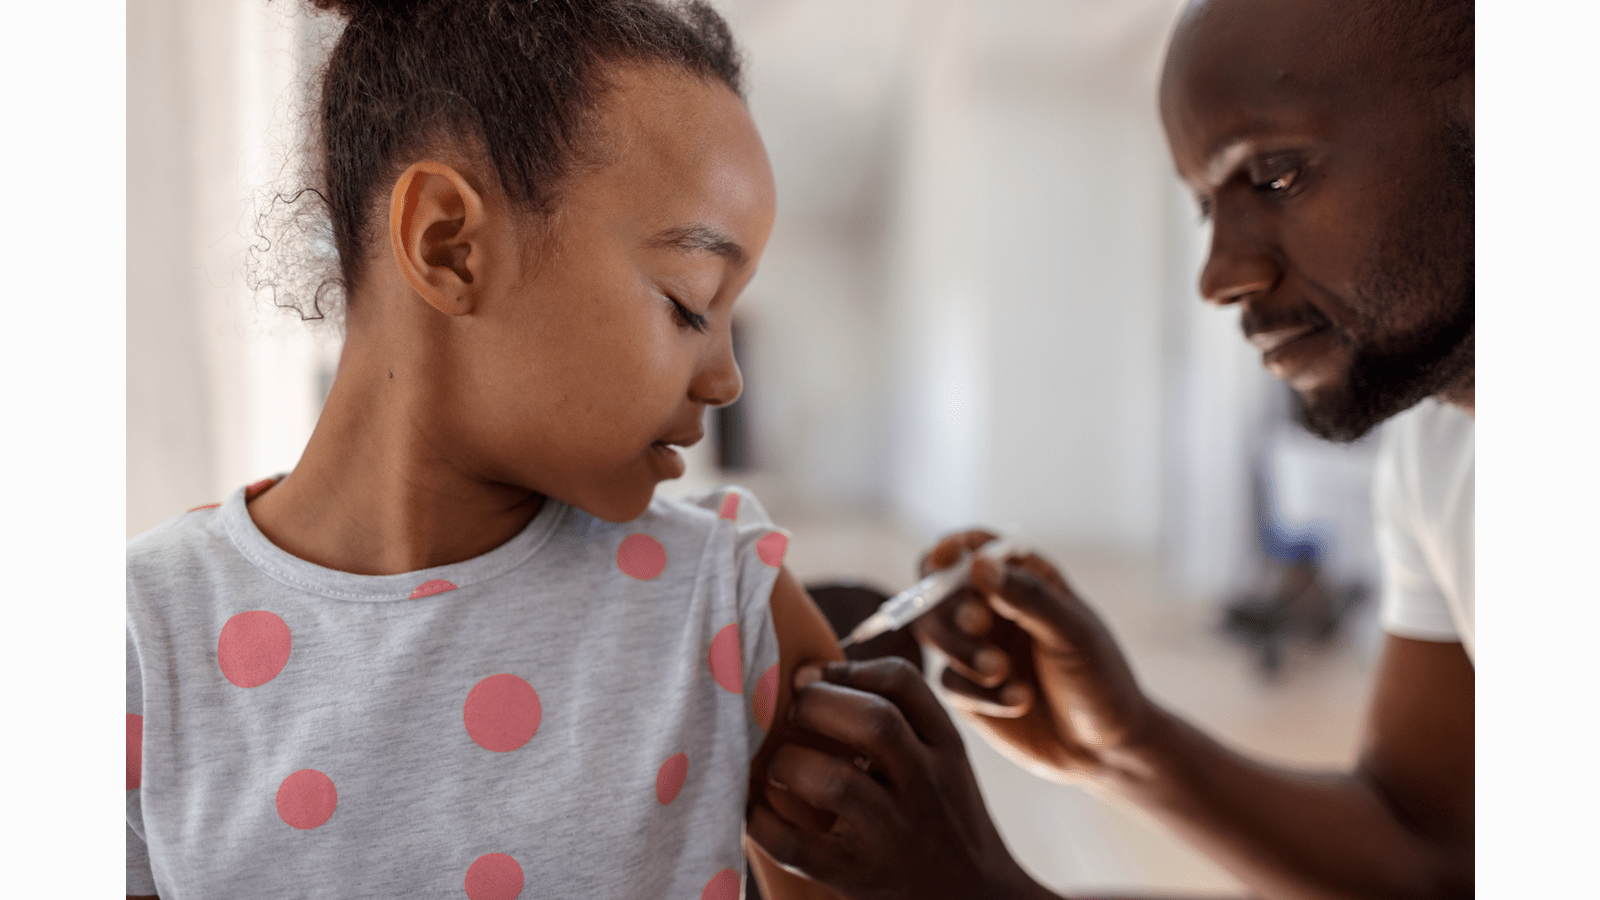 Girl receives a vaccination in her upper arm.